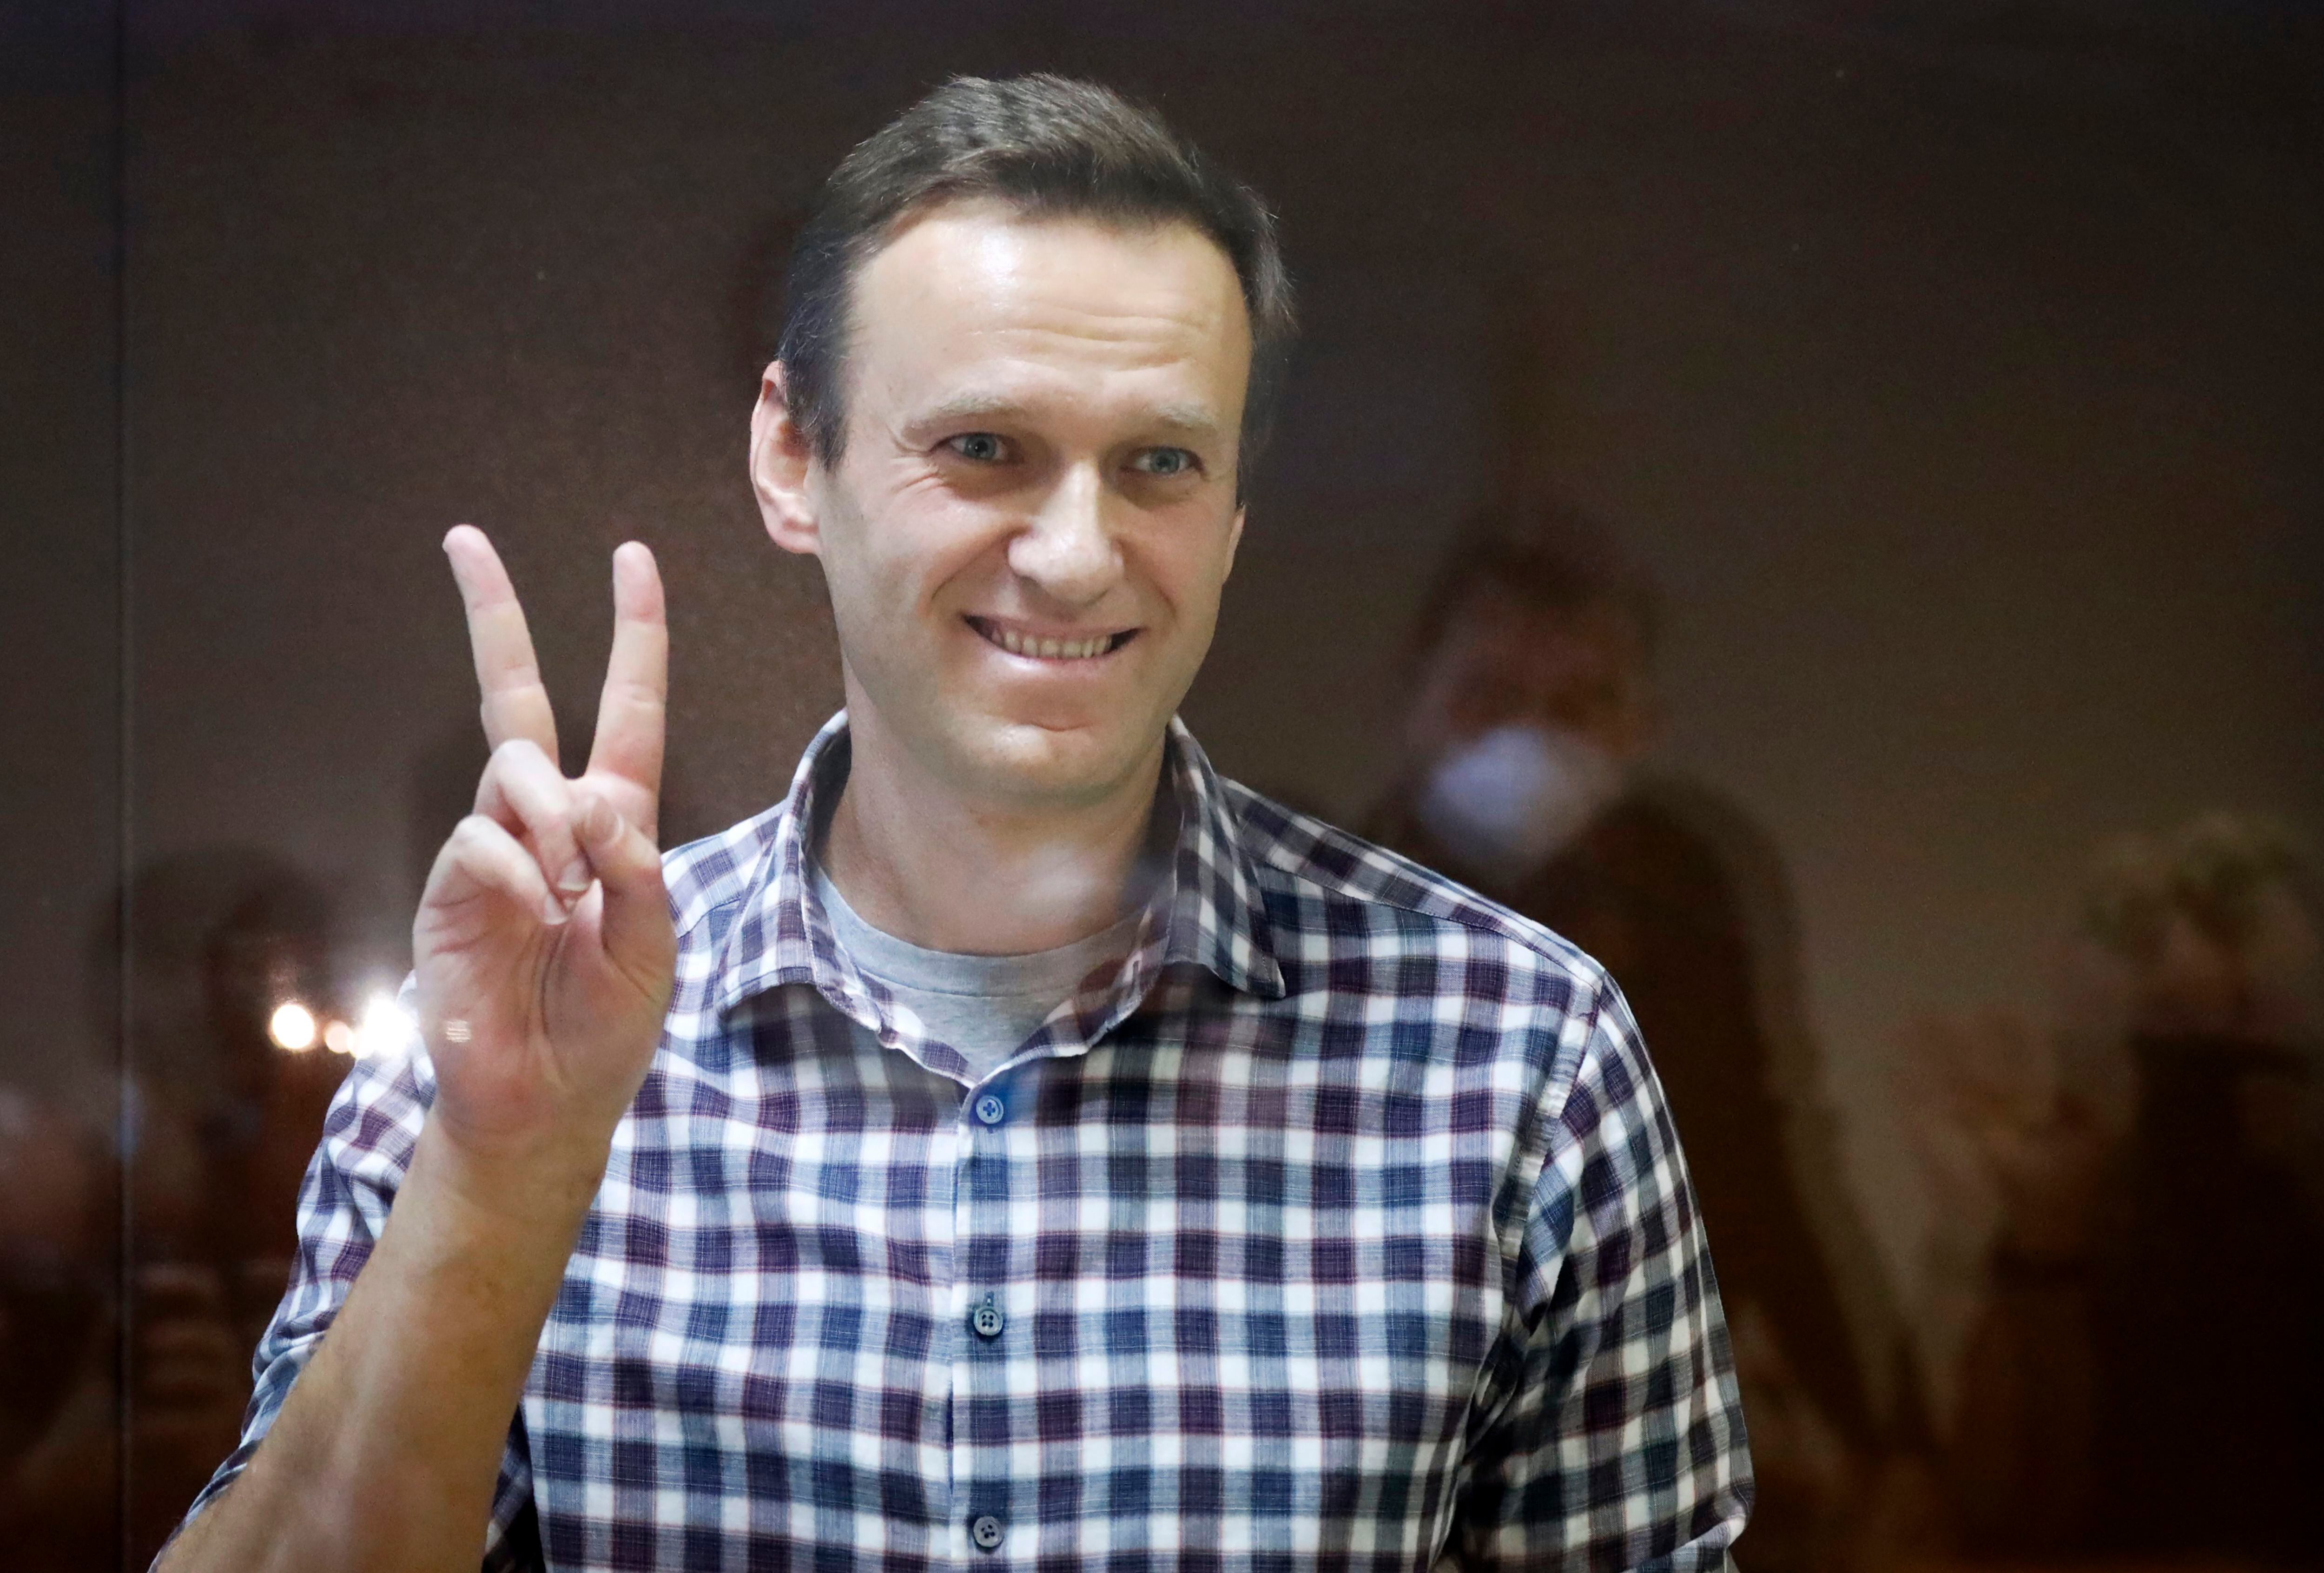 ‘Navalny’ aims to make noise for imprisoned Russian leader